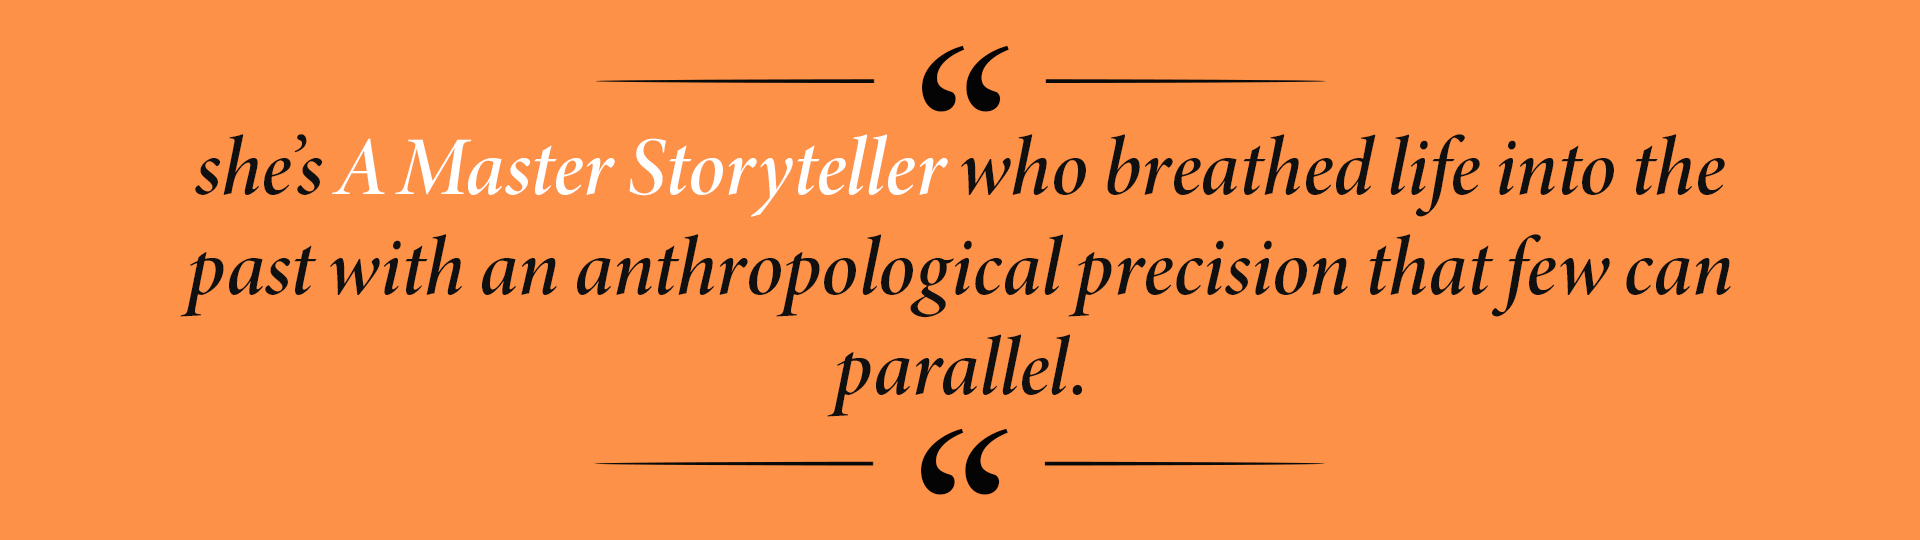 she’s A Master Storyteller who breathed life into the past with an anthropological precision that few can parallel.